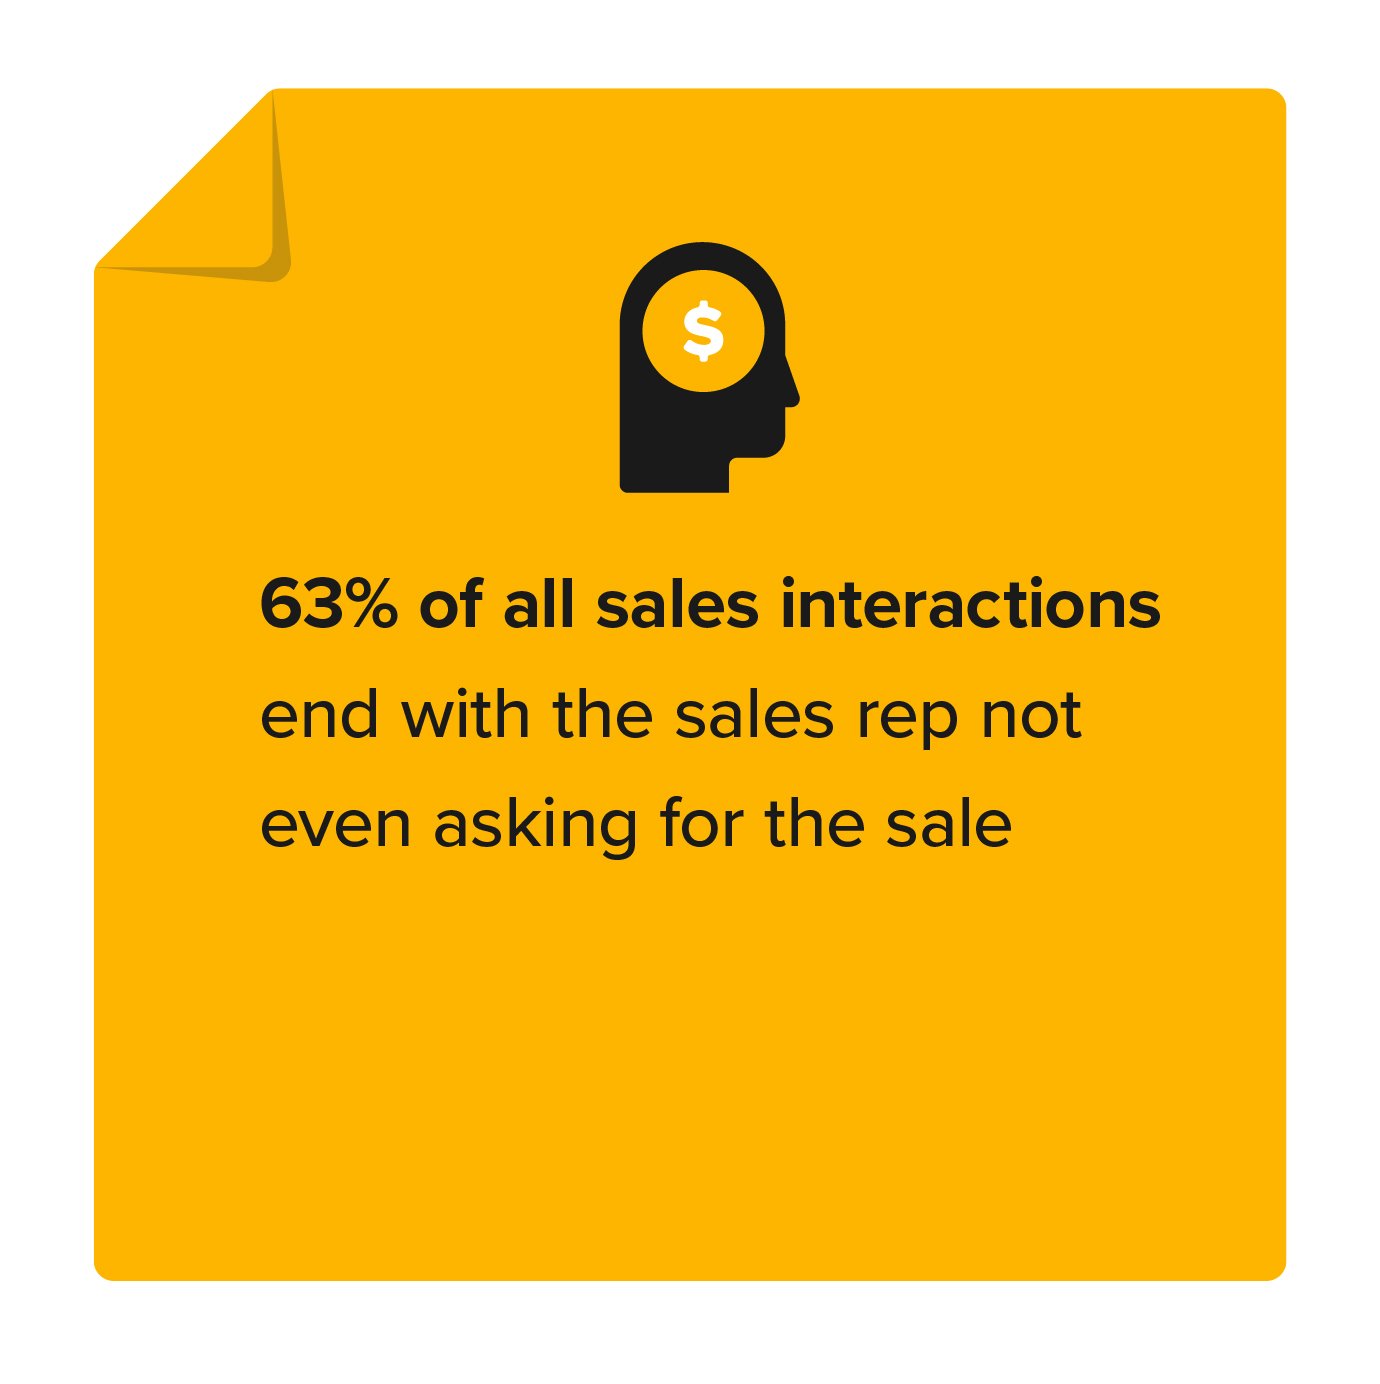 sales-reps-not-asking-for-the-sale.jpg